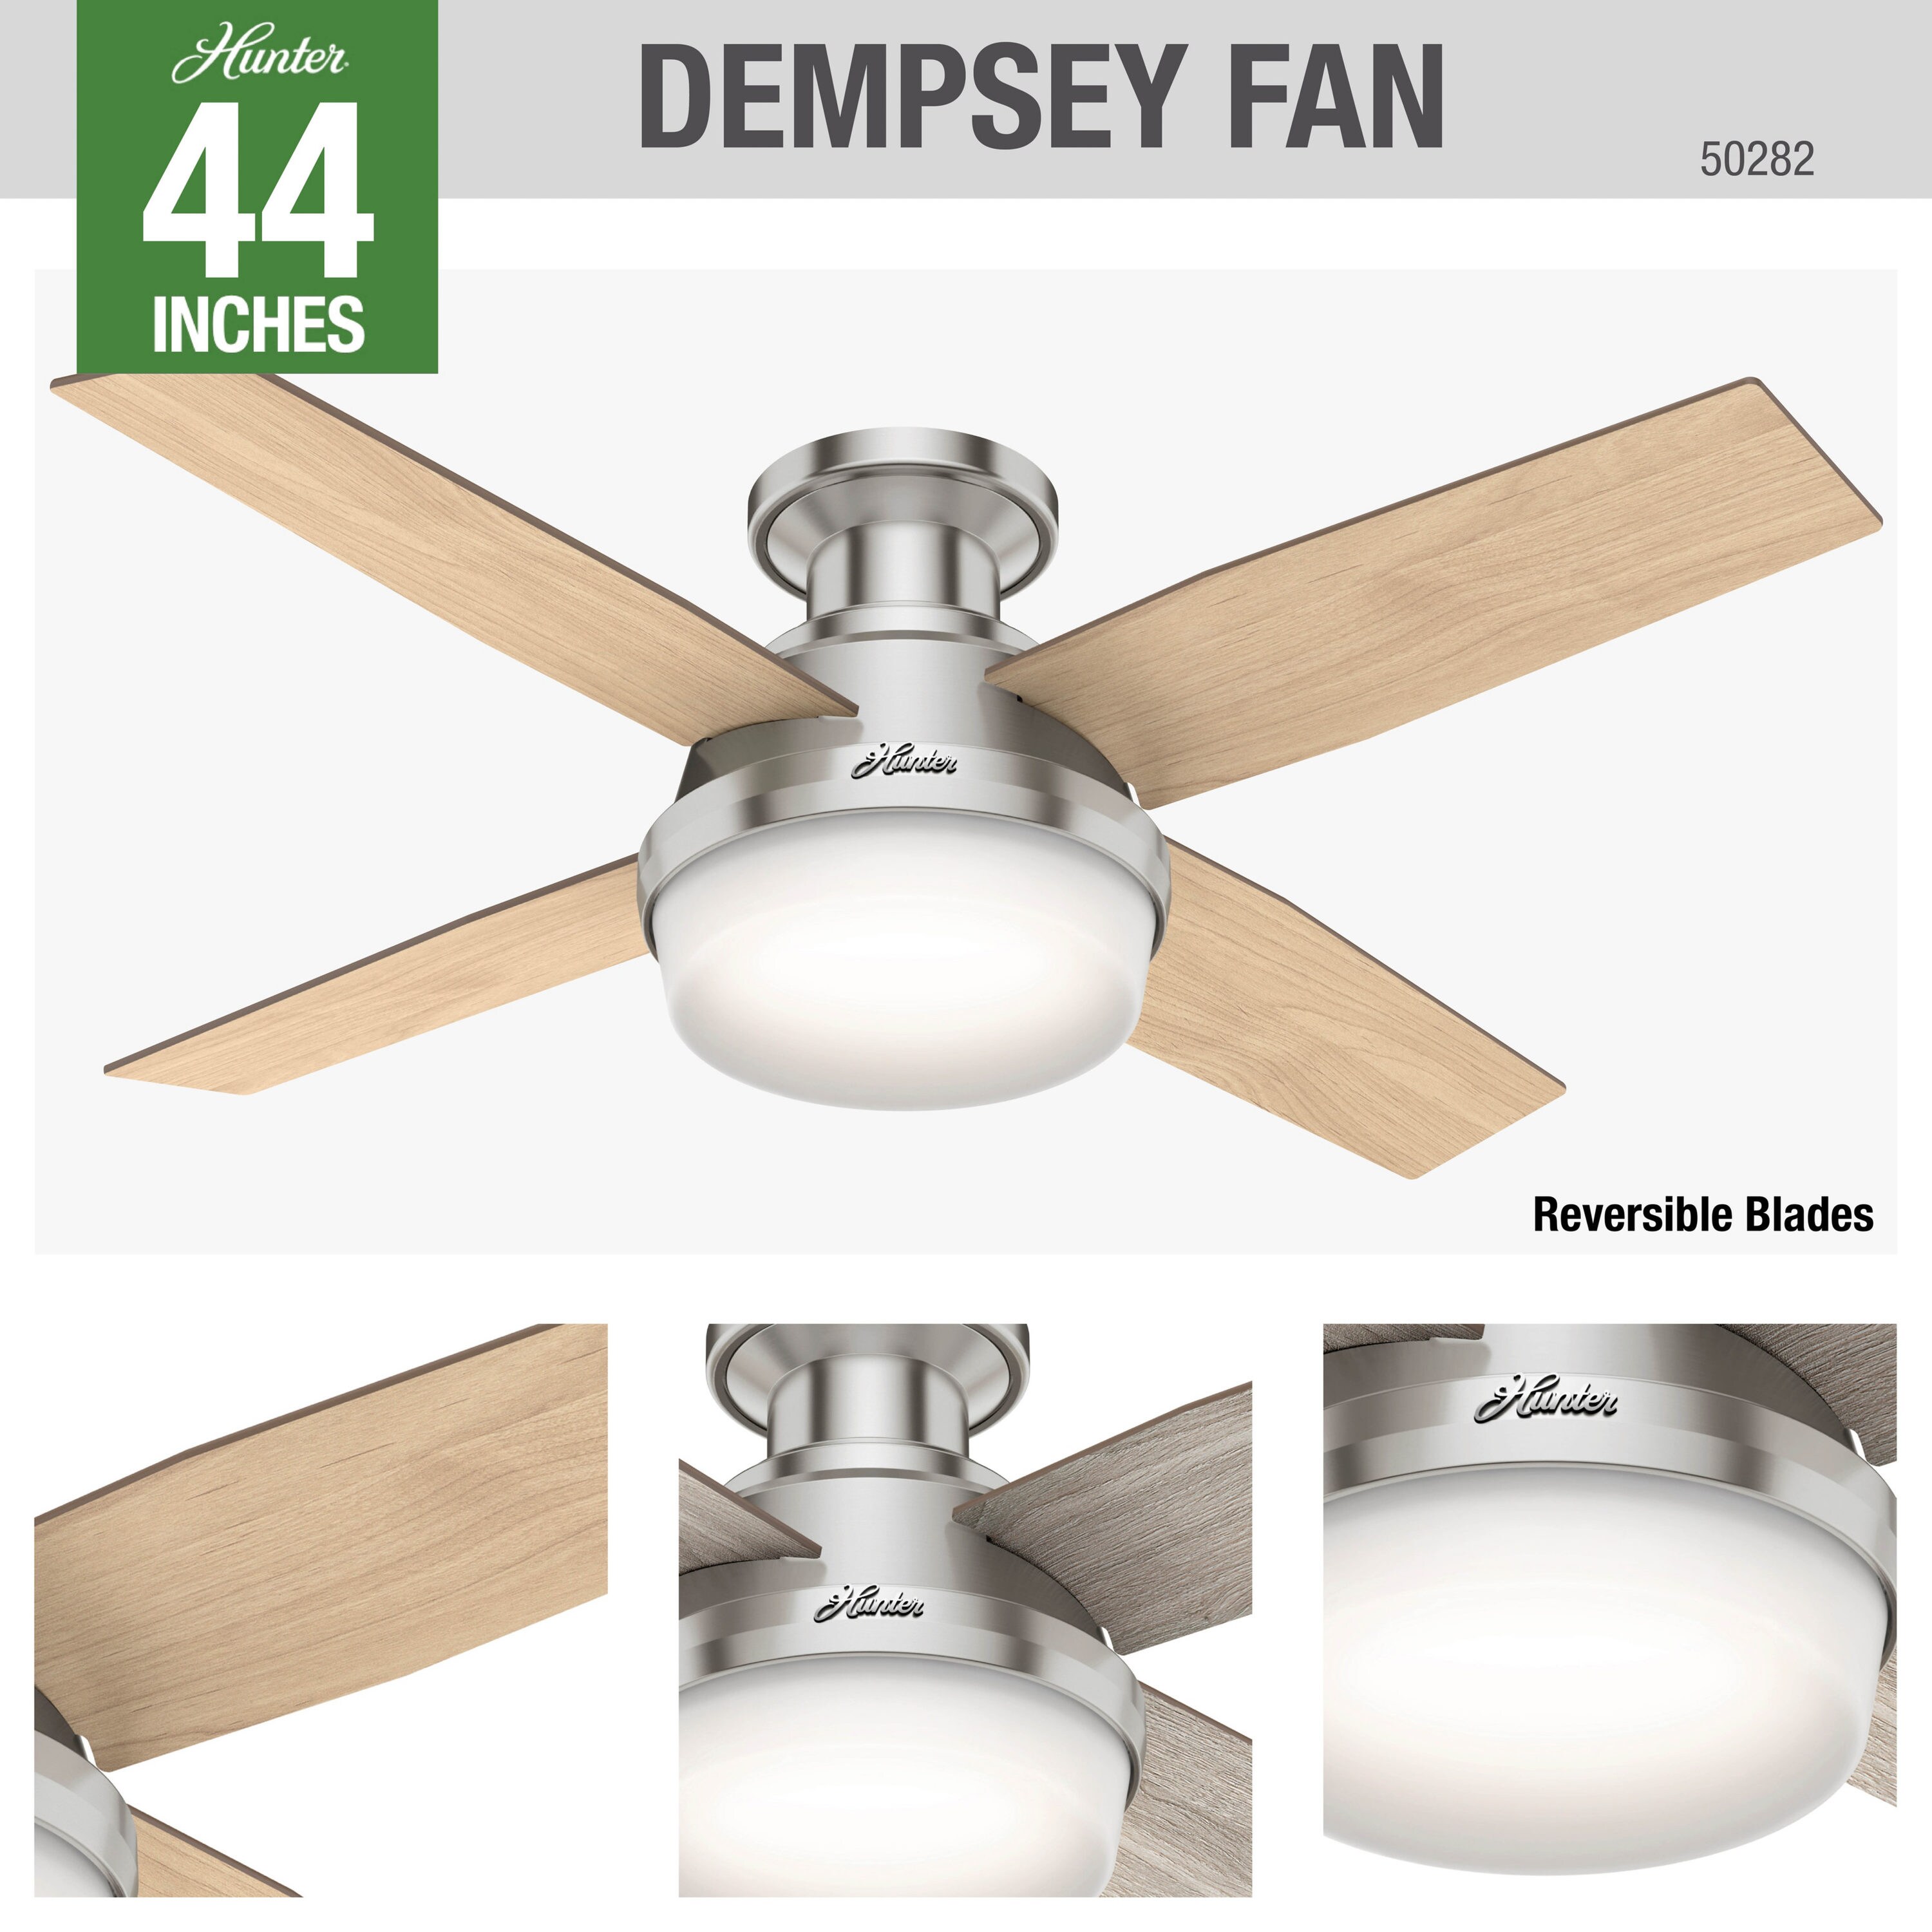 Brushed Nickel Hunter Fan Company 50282 Hunter Dempsey Indoor Low Profile ceiling Fan with LED Light and Remote Control 44 